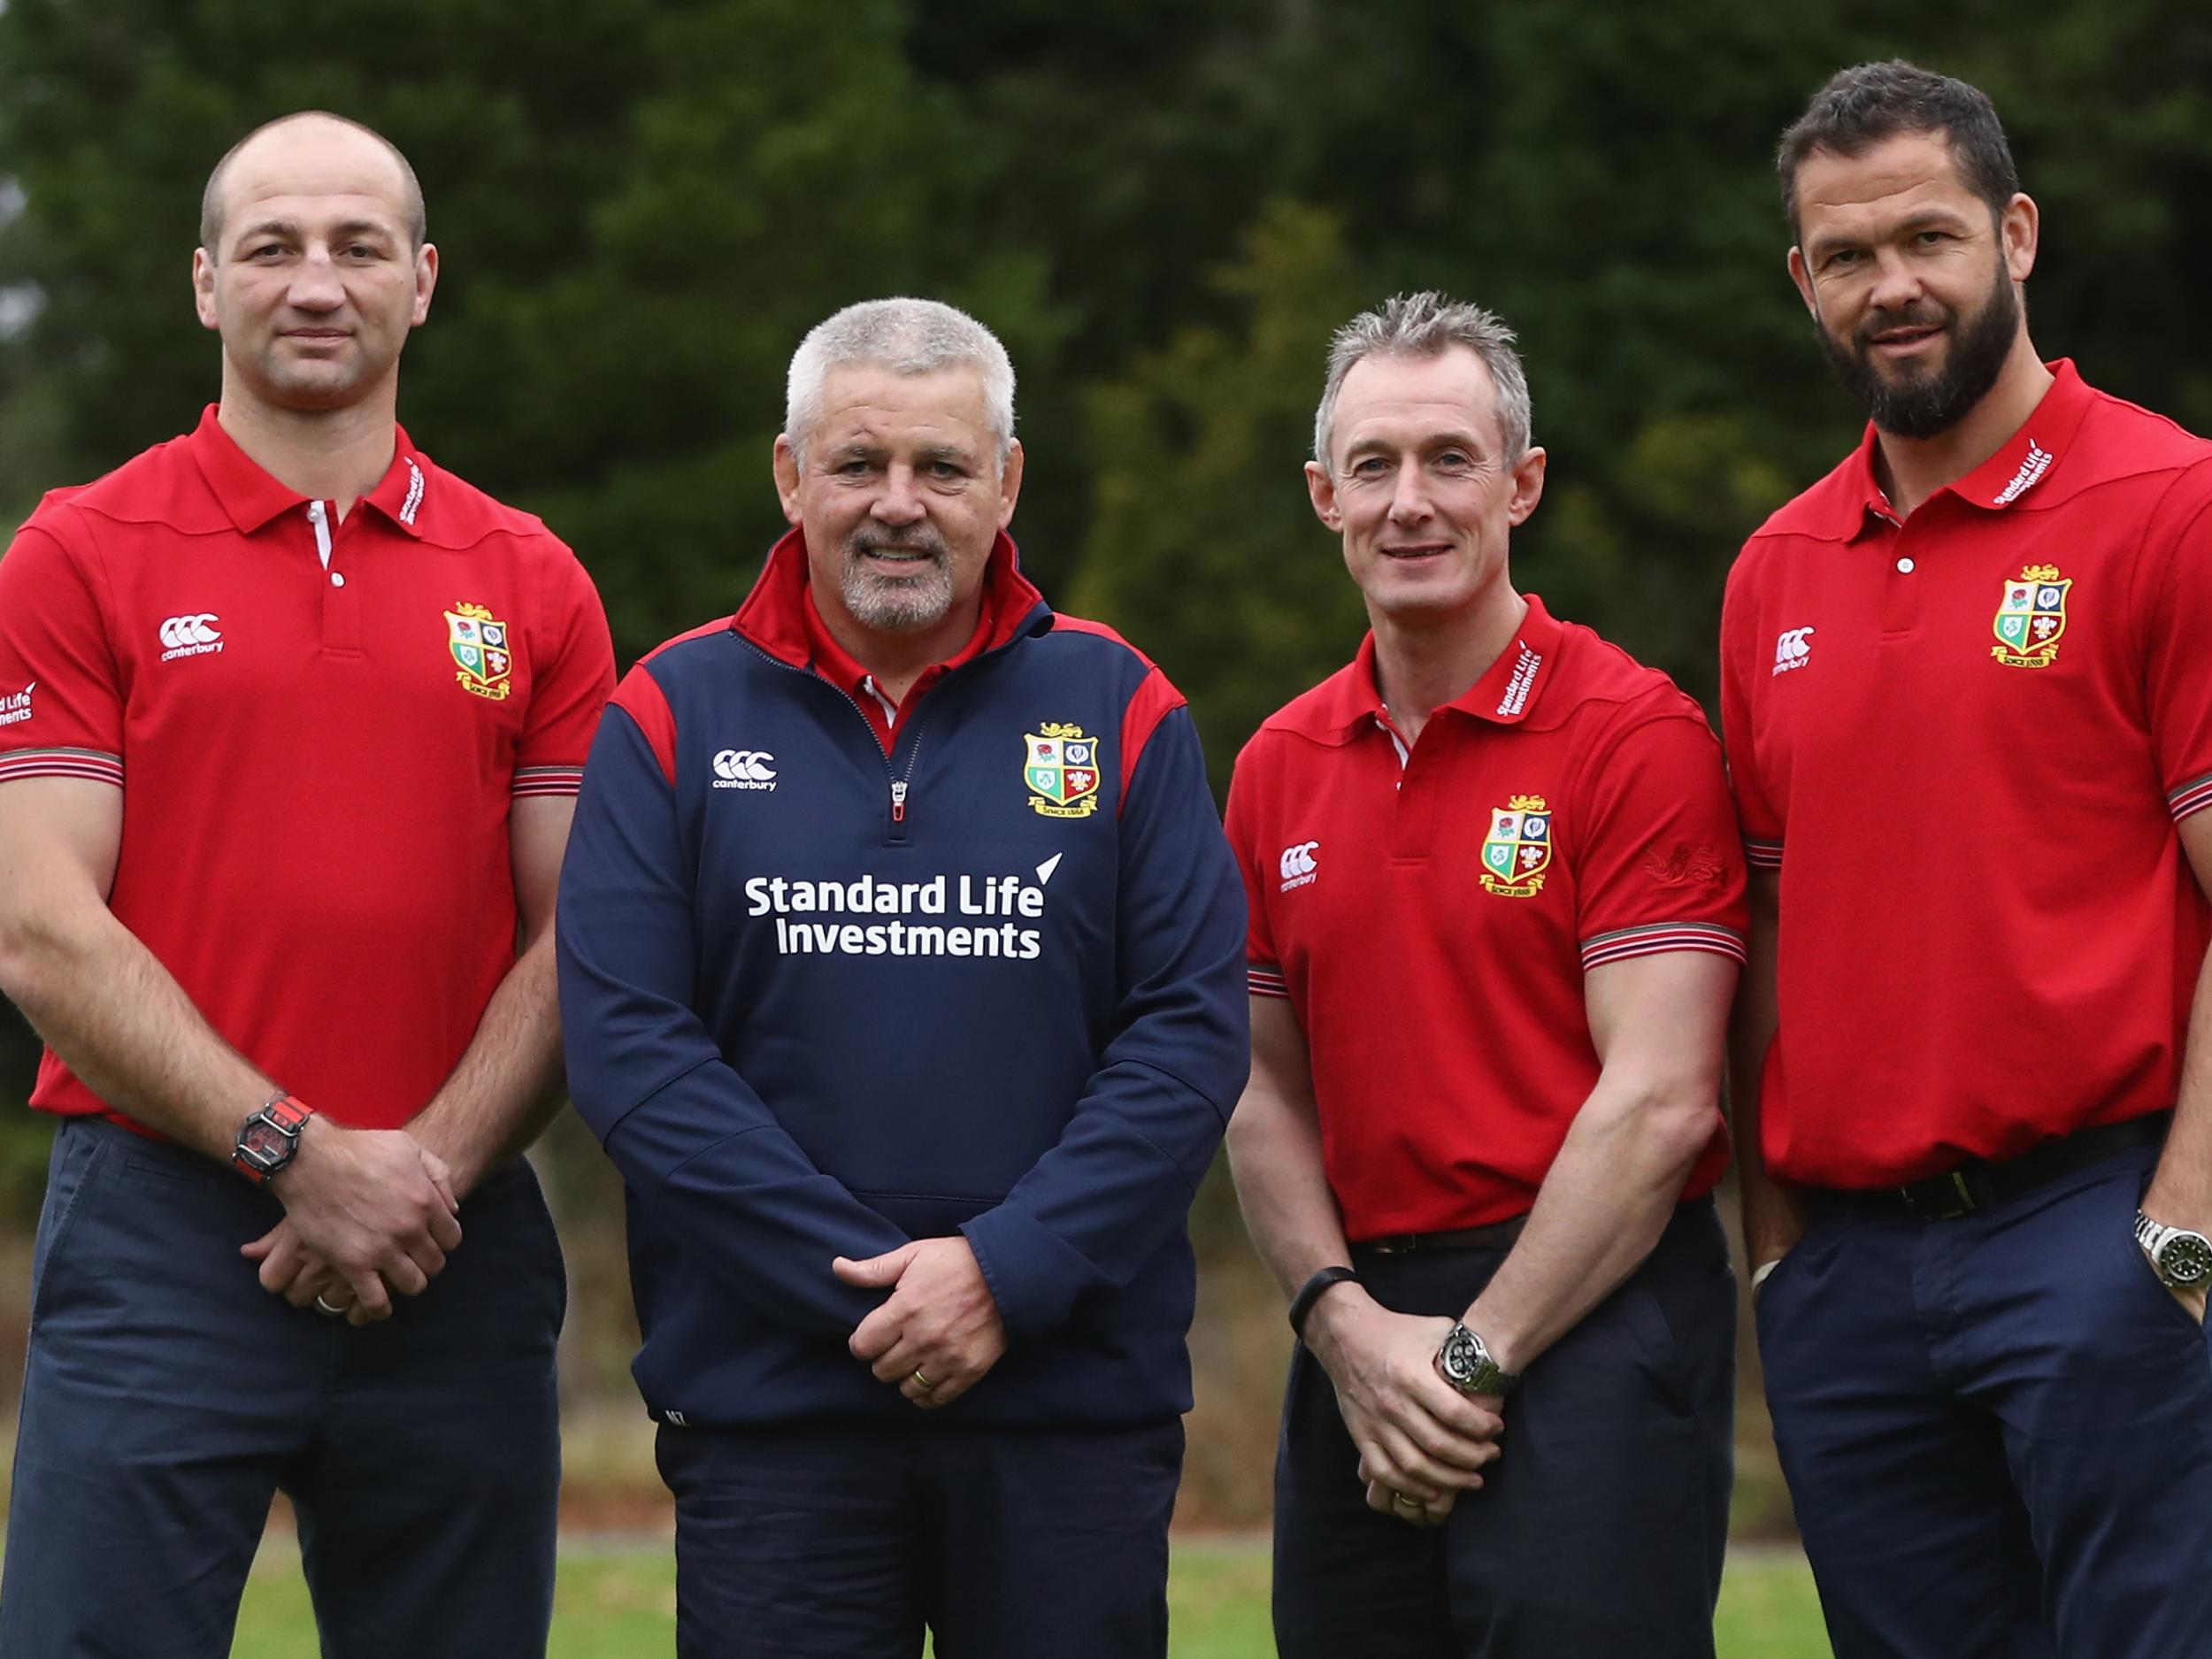 &#13;
Gatland stepped away from the Wales role this season to focus on the Lions &#13;